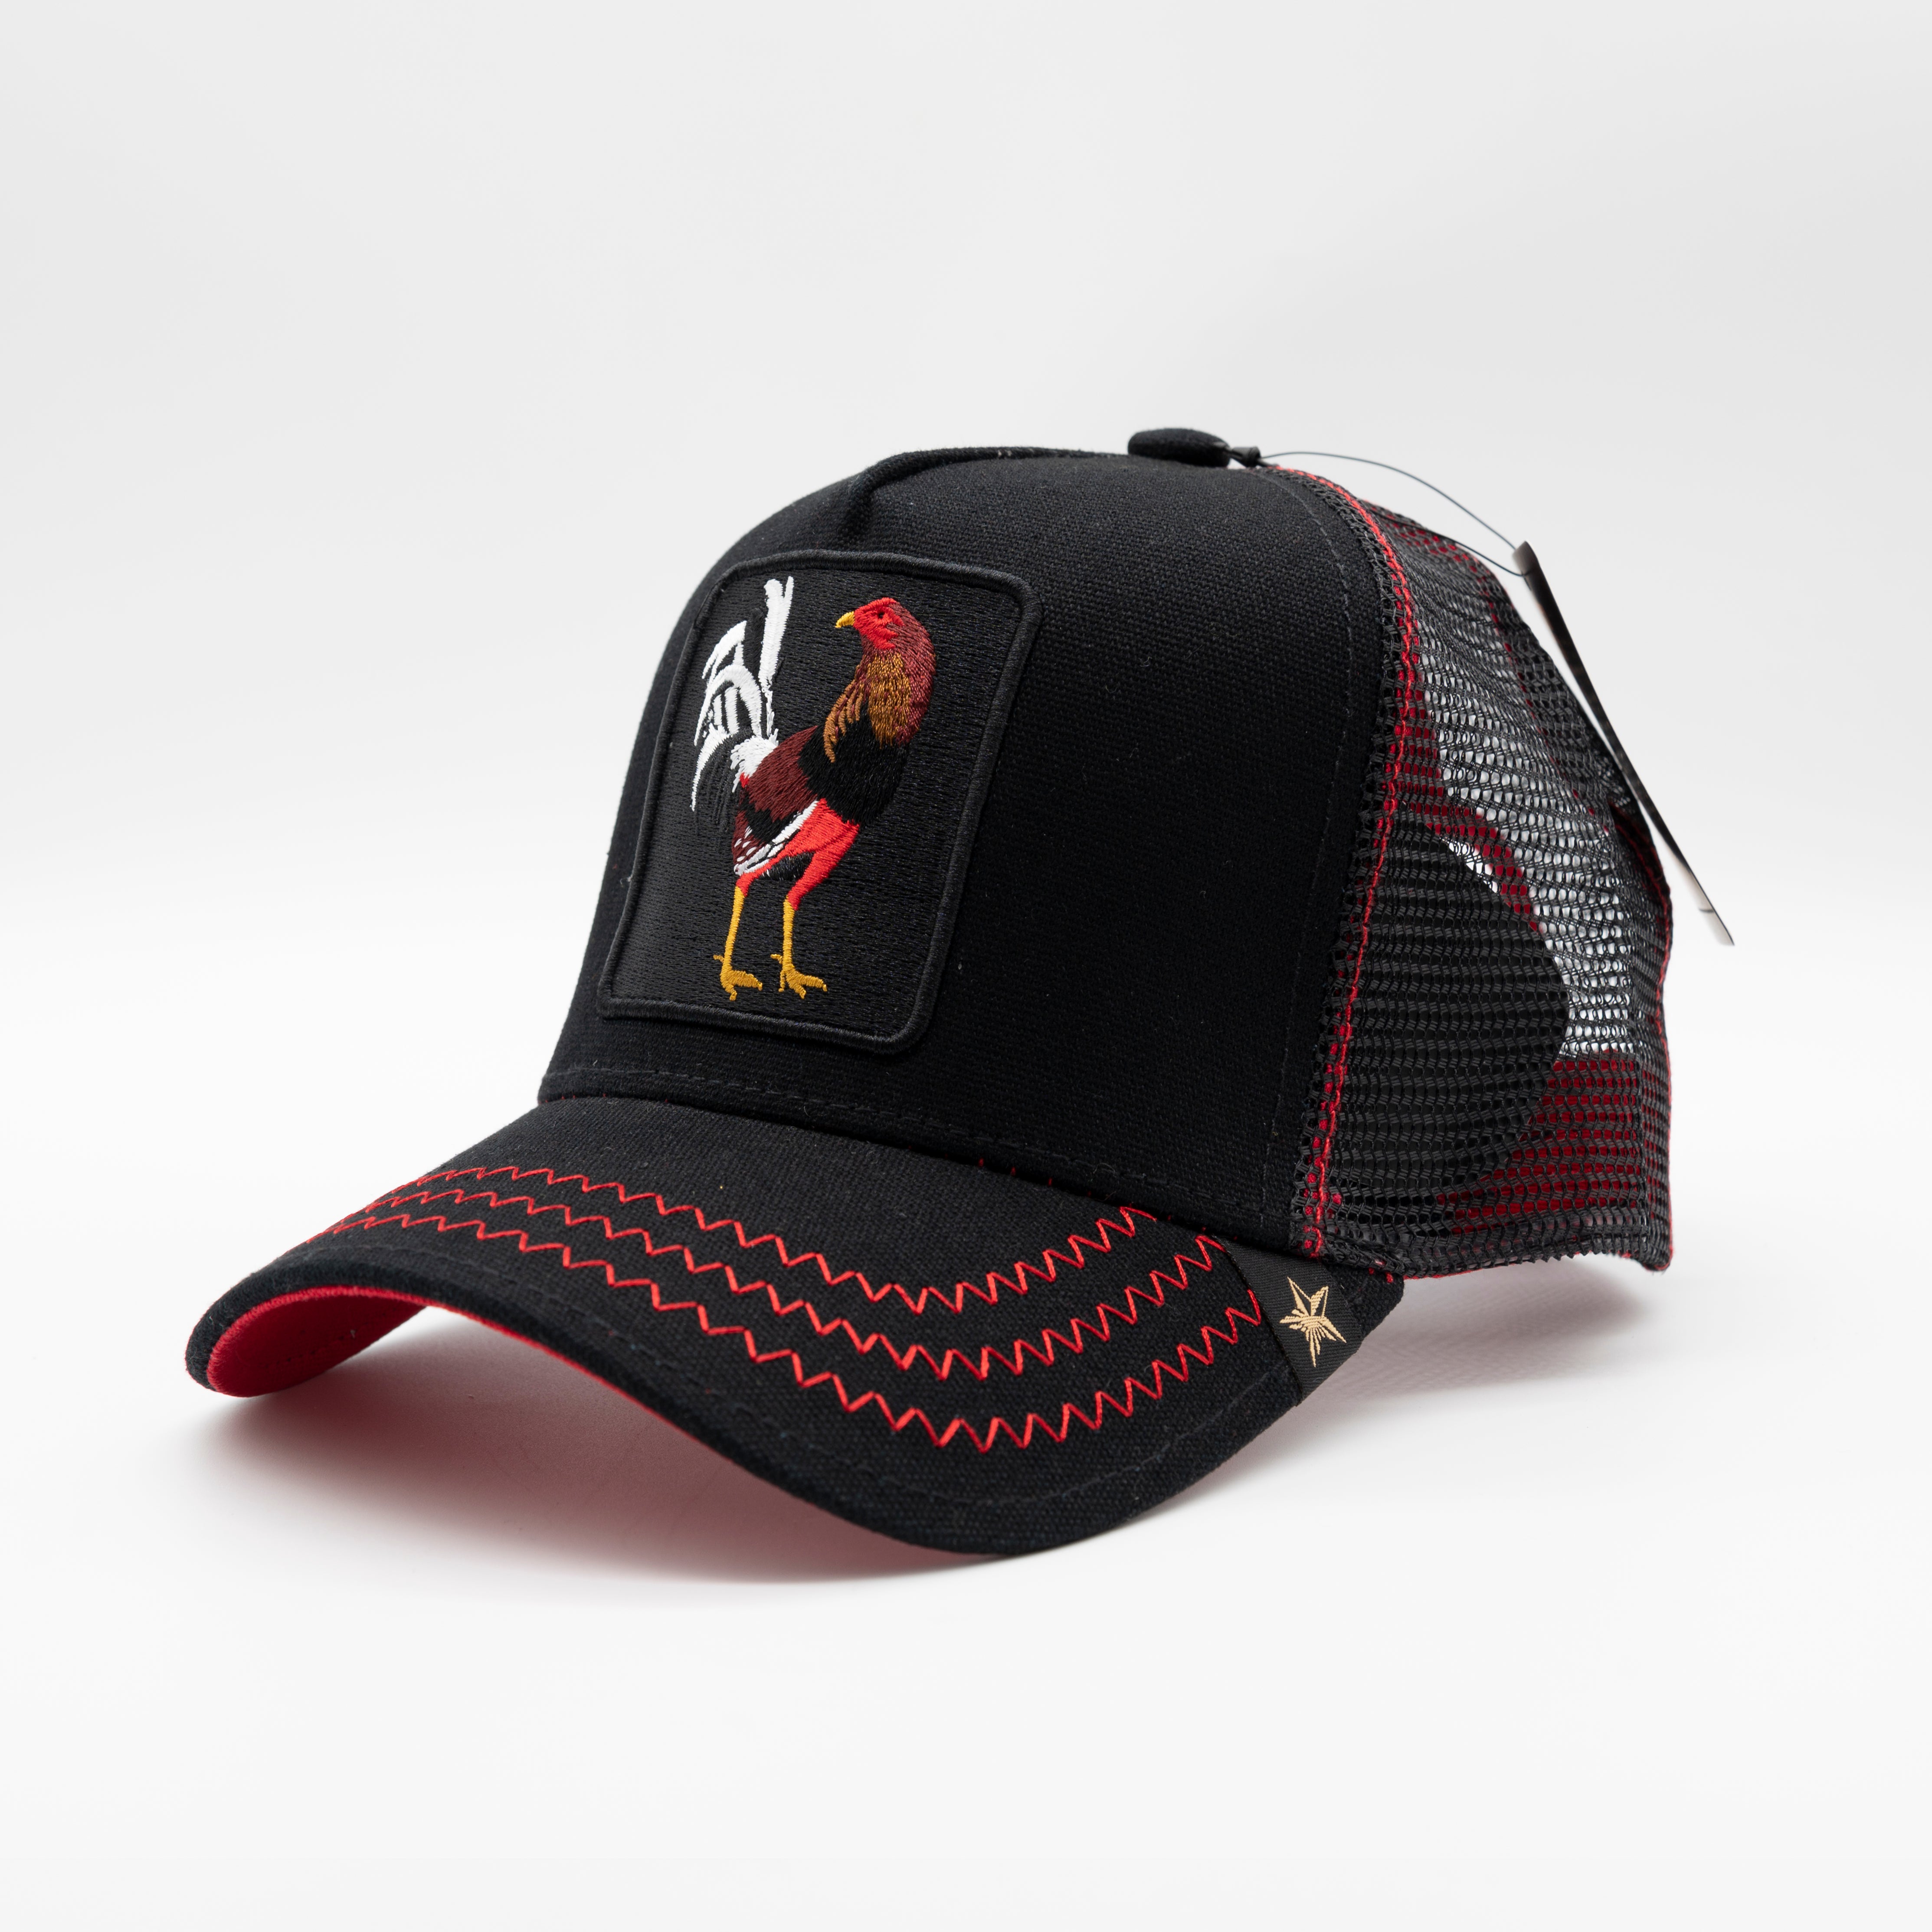 Gold Star Hats The Rooster Black Red Trucker Hat